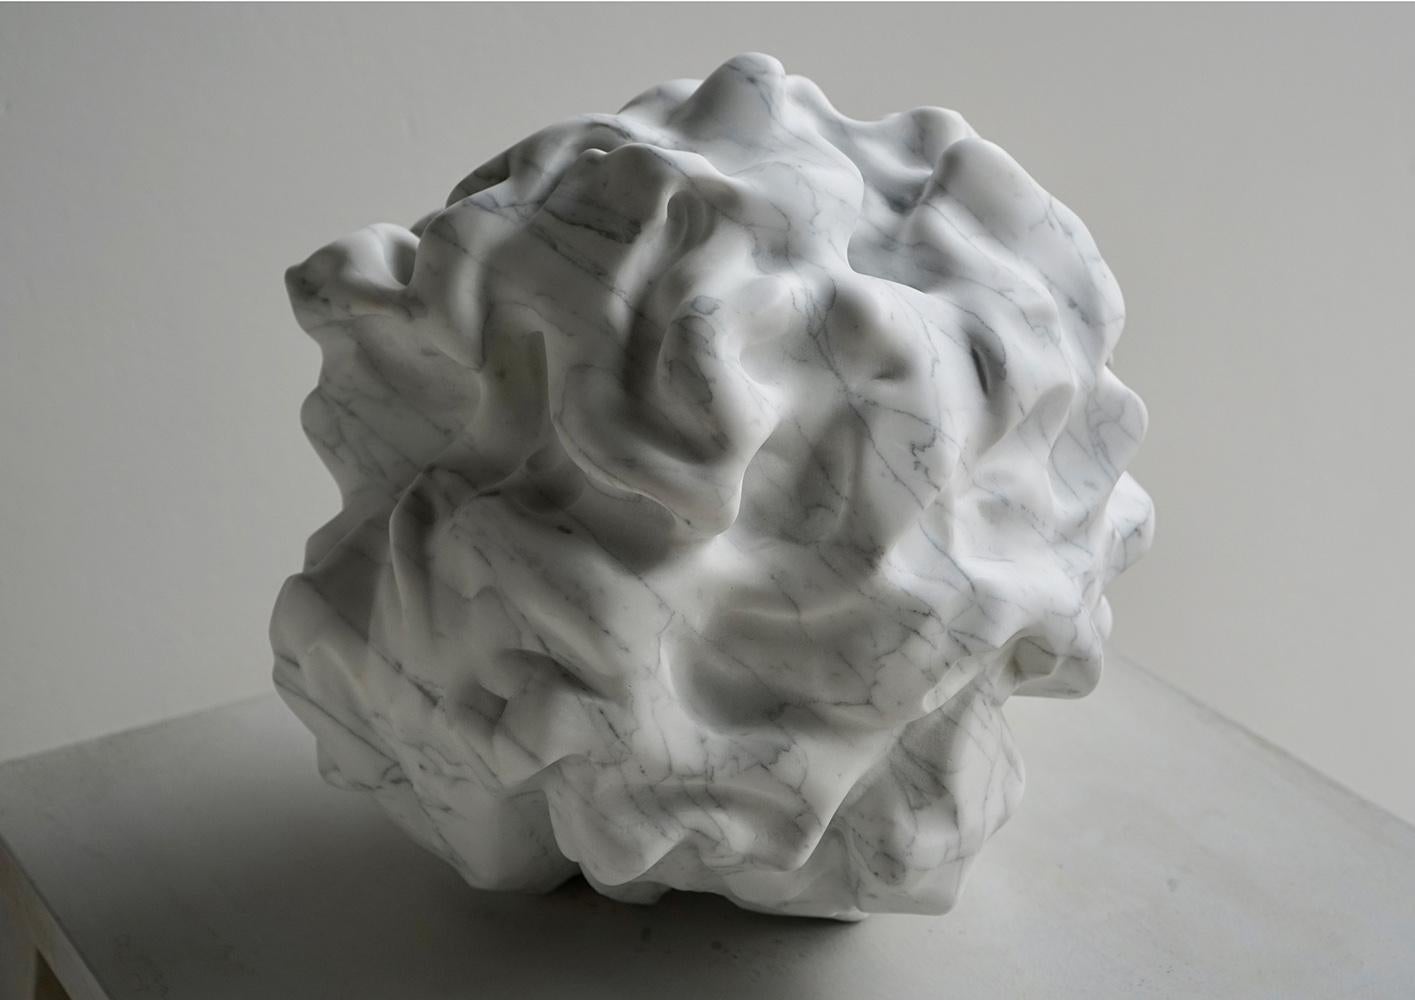 Ghost by British artist Richard Perry (b. 1960).
Carrara marble sculpture, 35 cm × 35 cm × 35 cm // 13.78 x 13.78 x 13.78 in.
This piece is part of a recent series by the artist, characterized by organic and flexible shapes giving the sculptures a